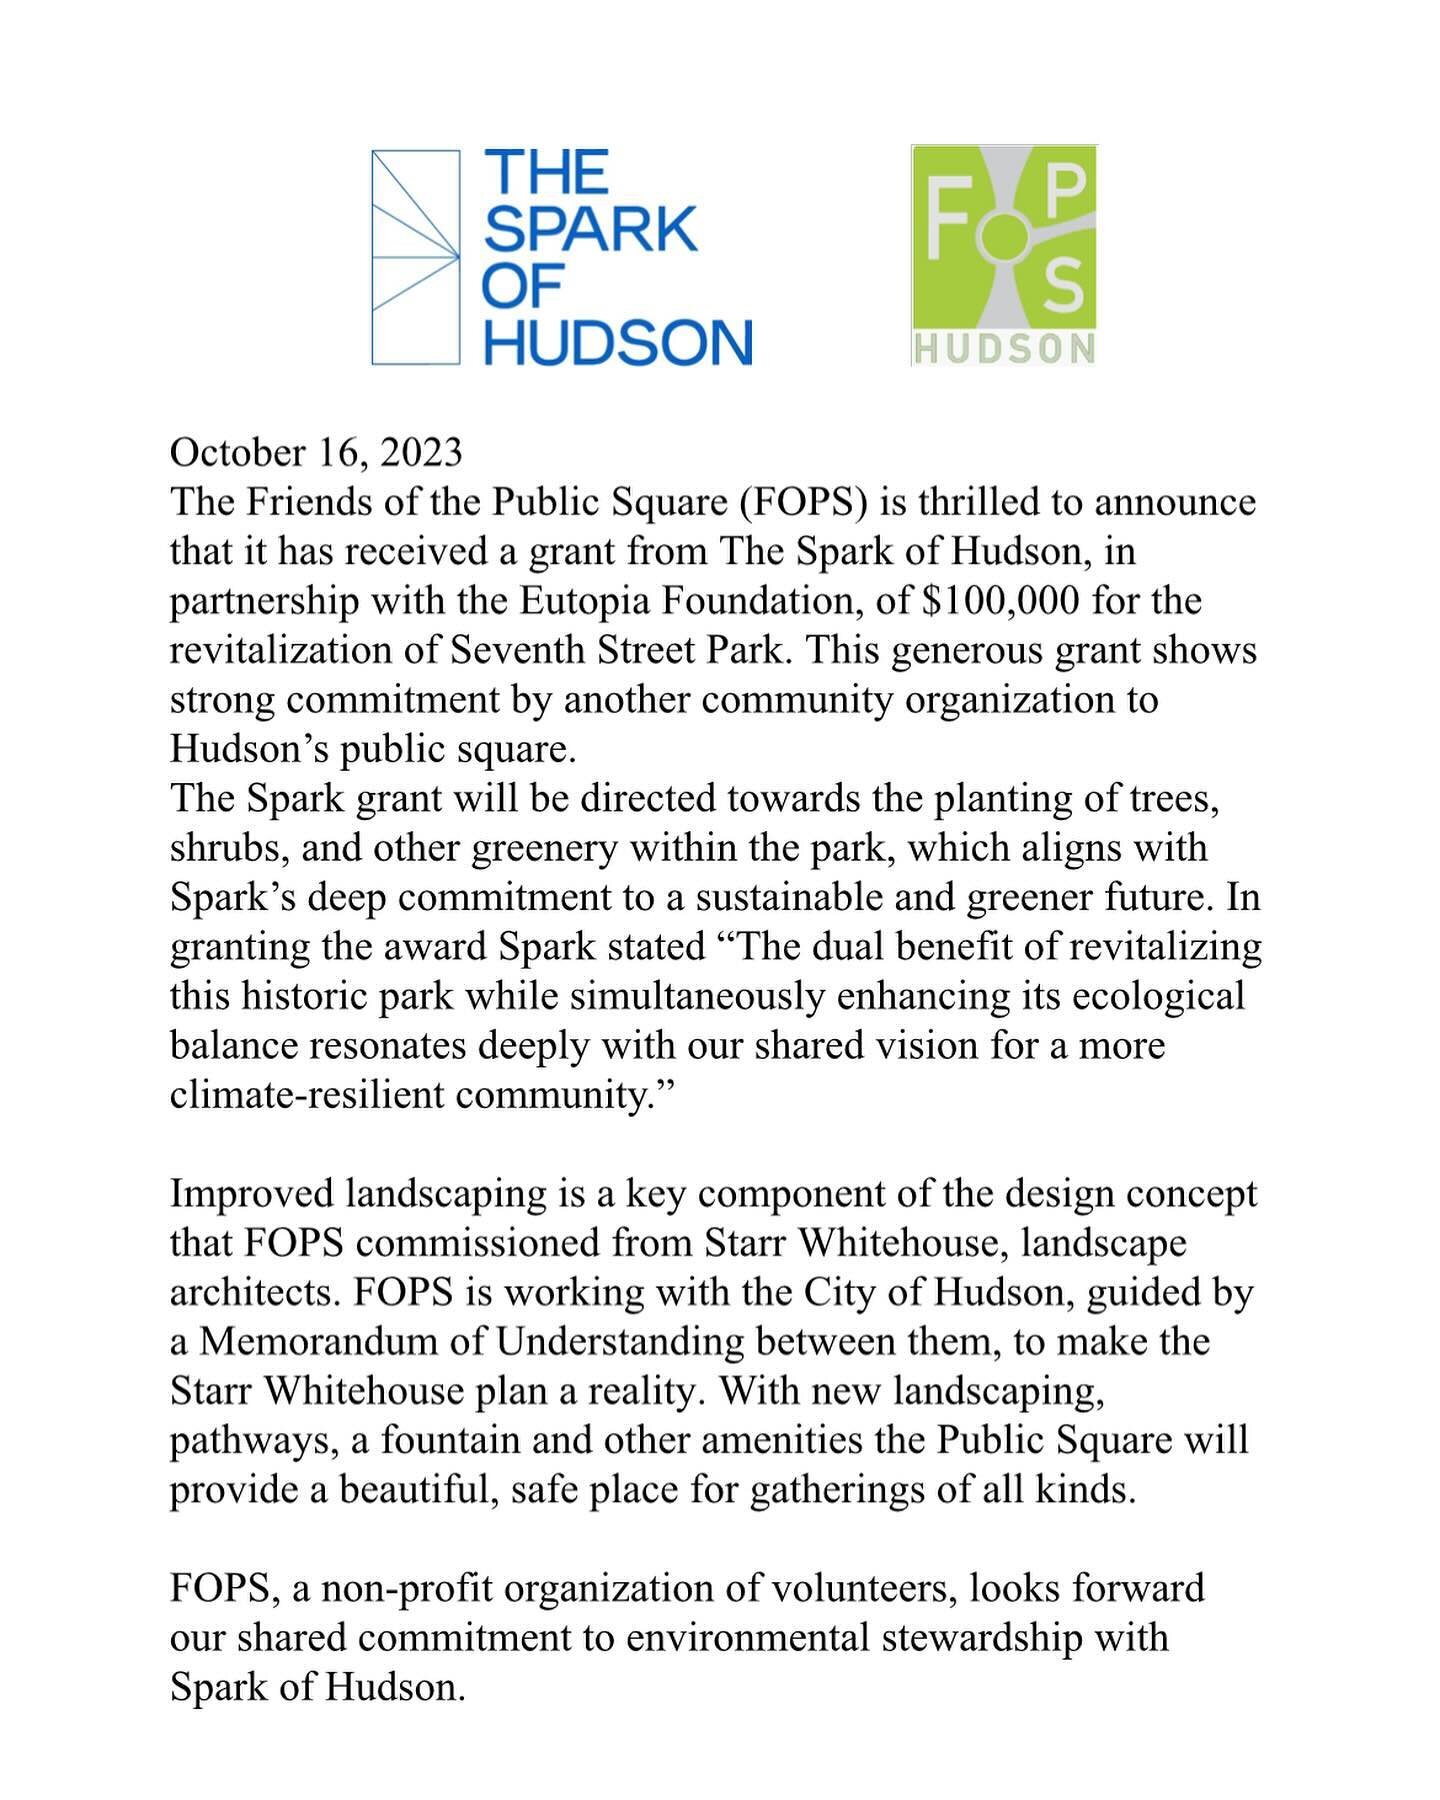 The Public Square receives a grant from the Spark of Hudson for $100,000!!!! Thank you Spark 🙏#fopshudson